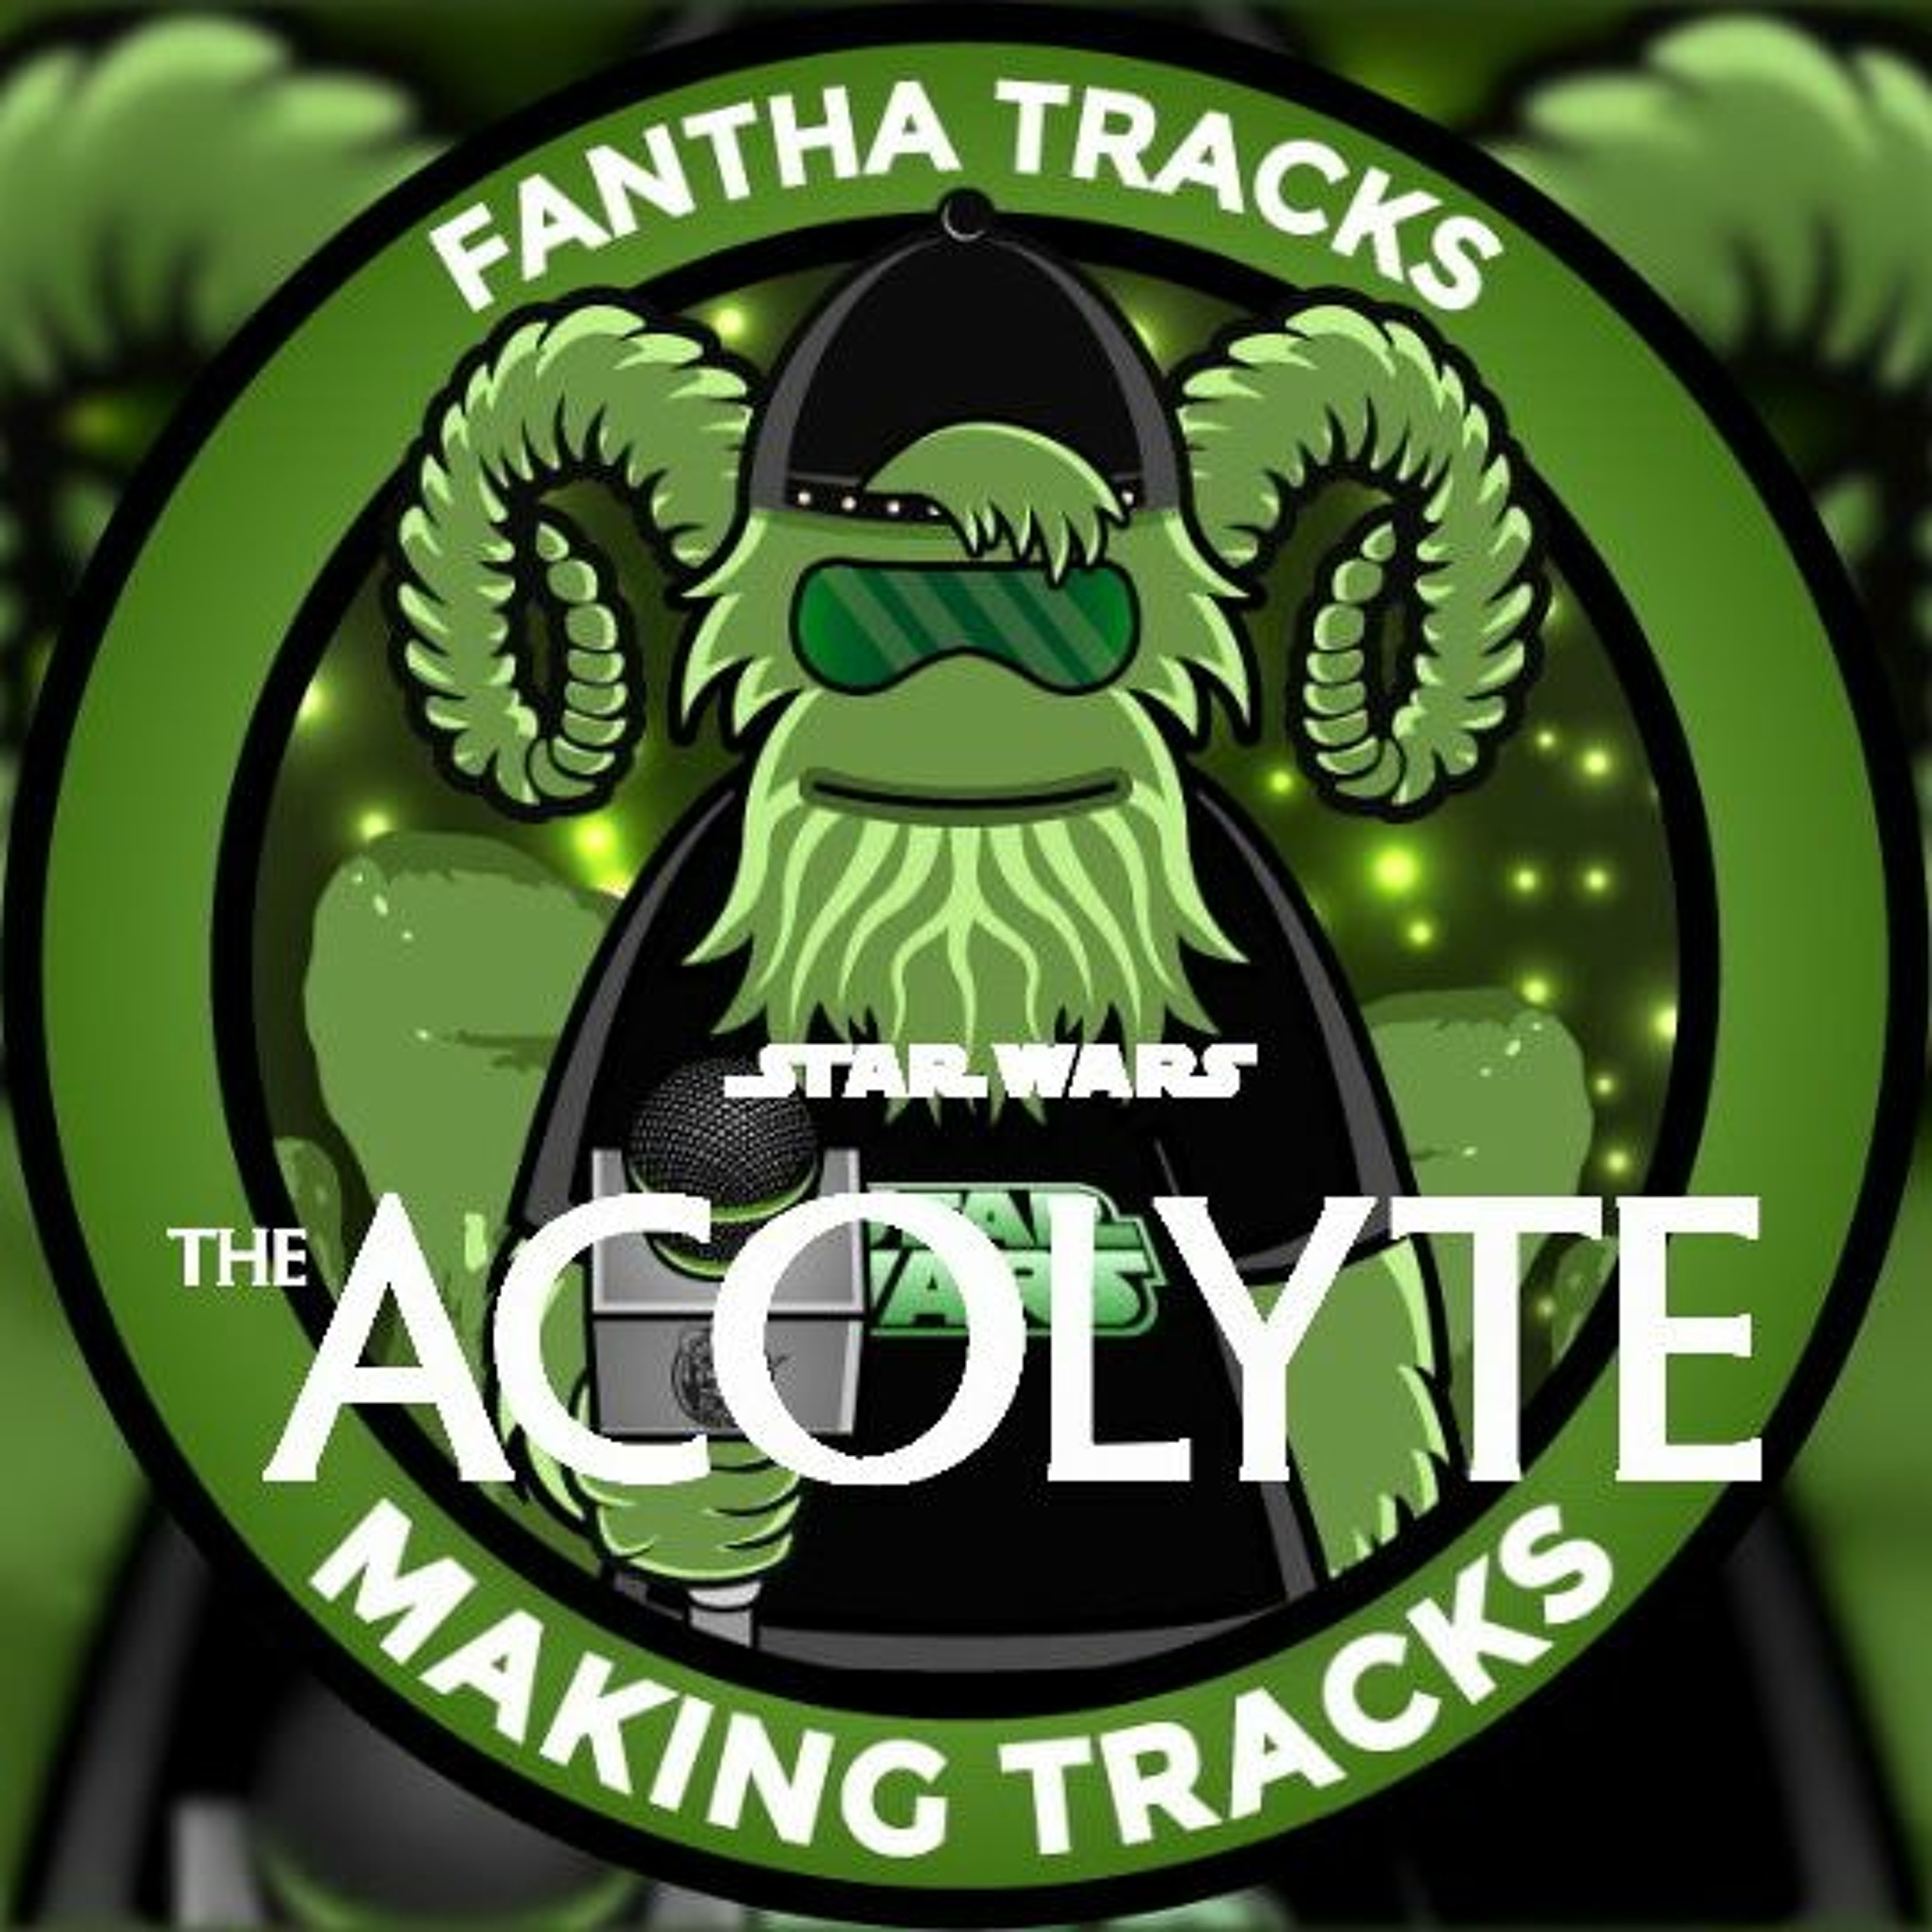 Making Tracks Reaction Chat: The Acolyte trailer